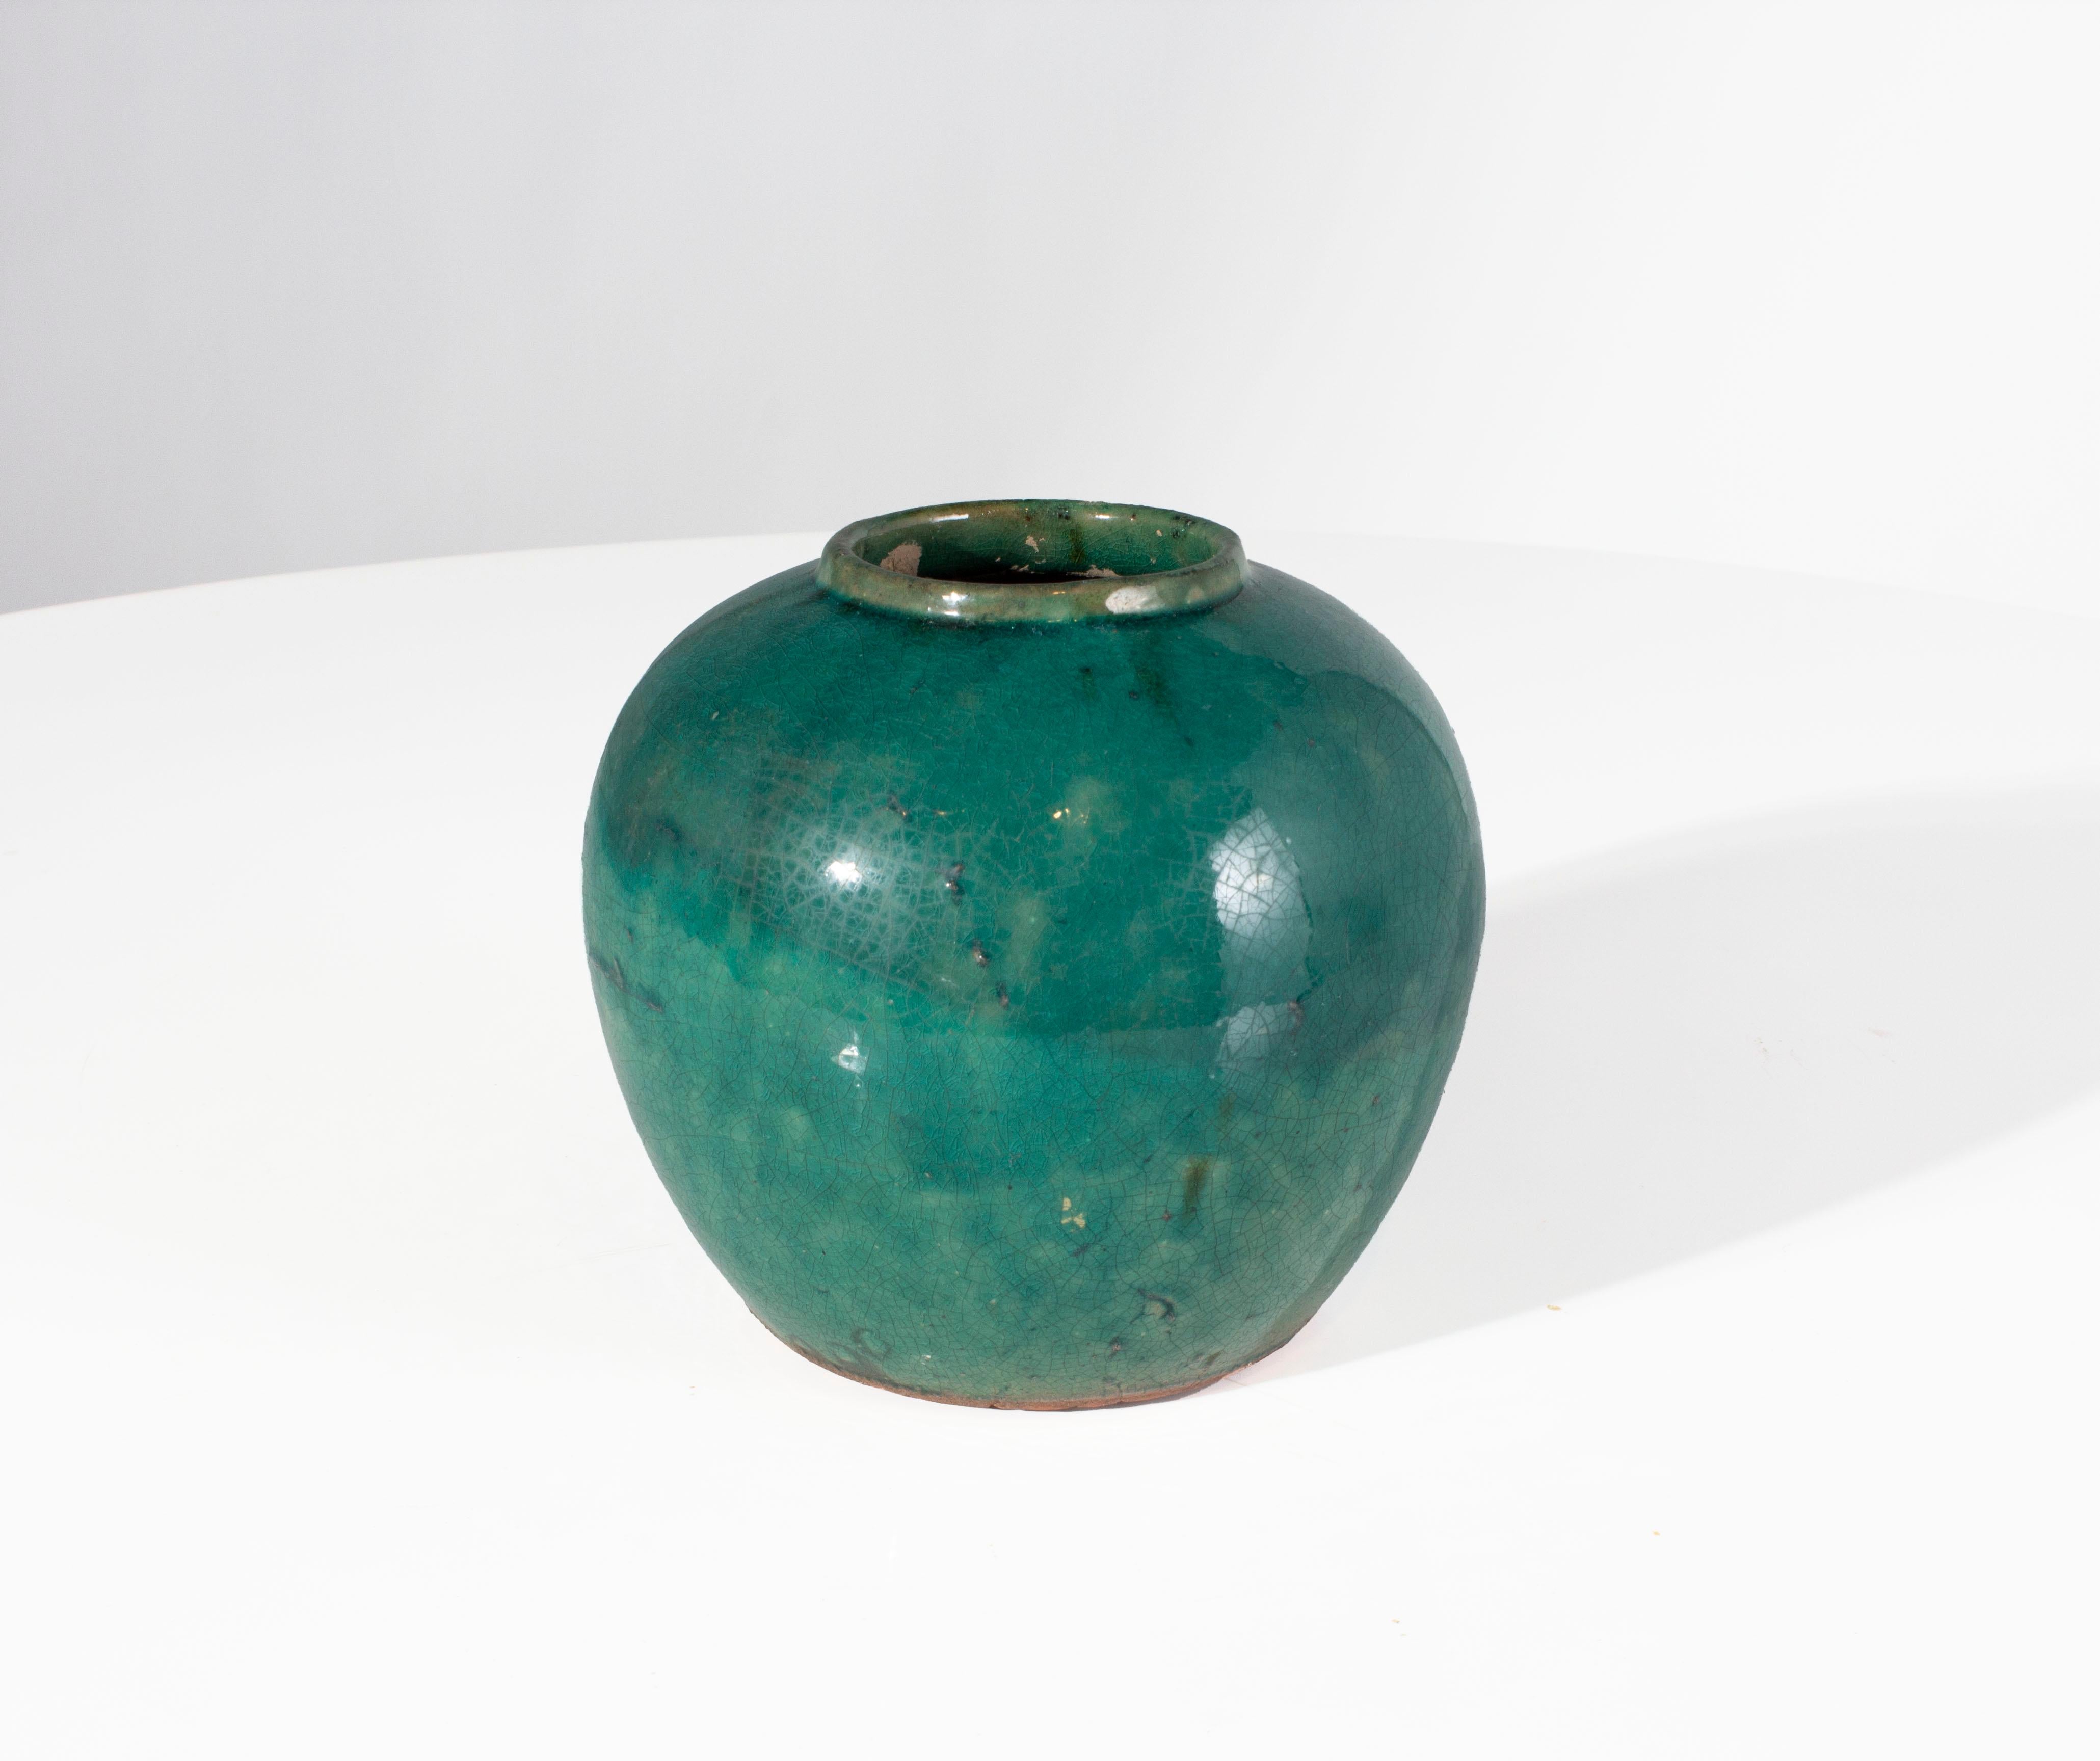 Small antique green glaze jar

From Belgium

All jars vary slightly, no two jars are identical.